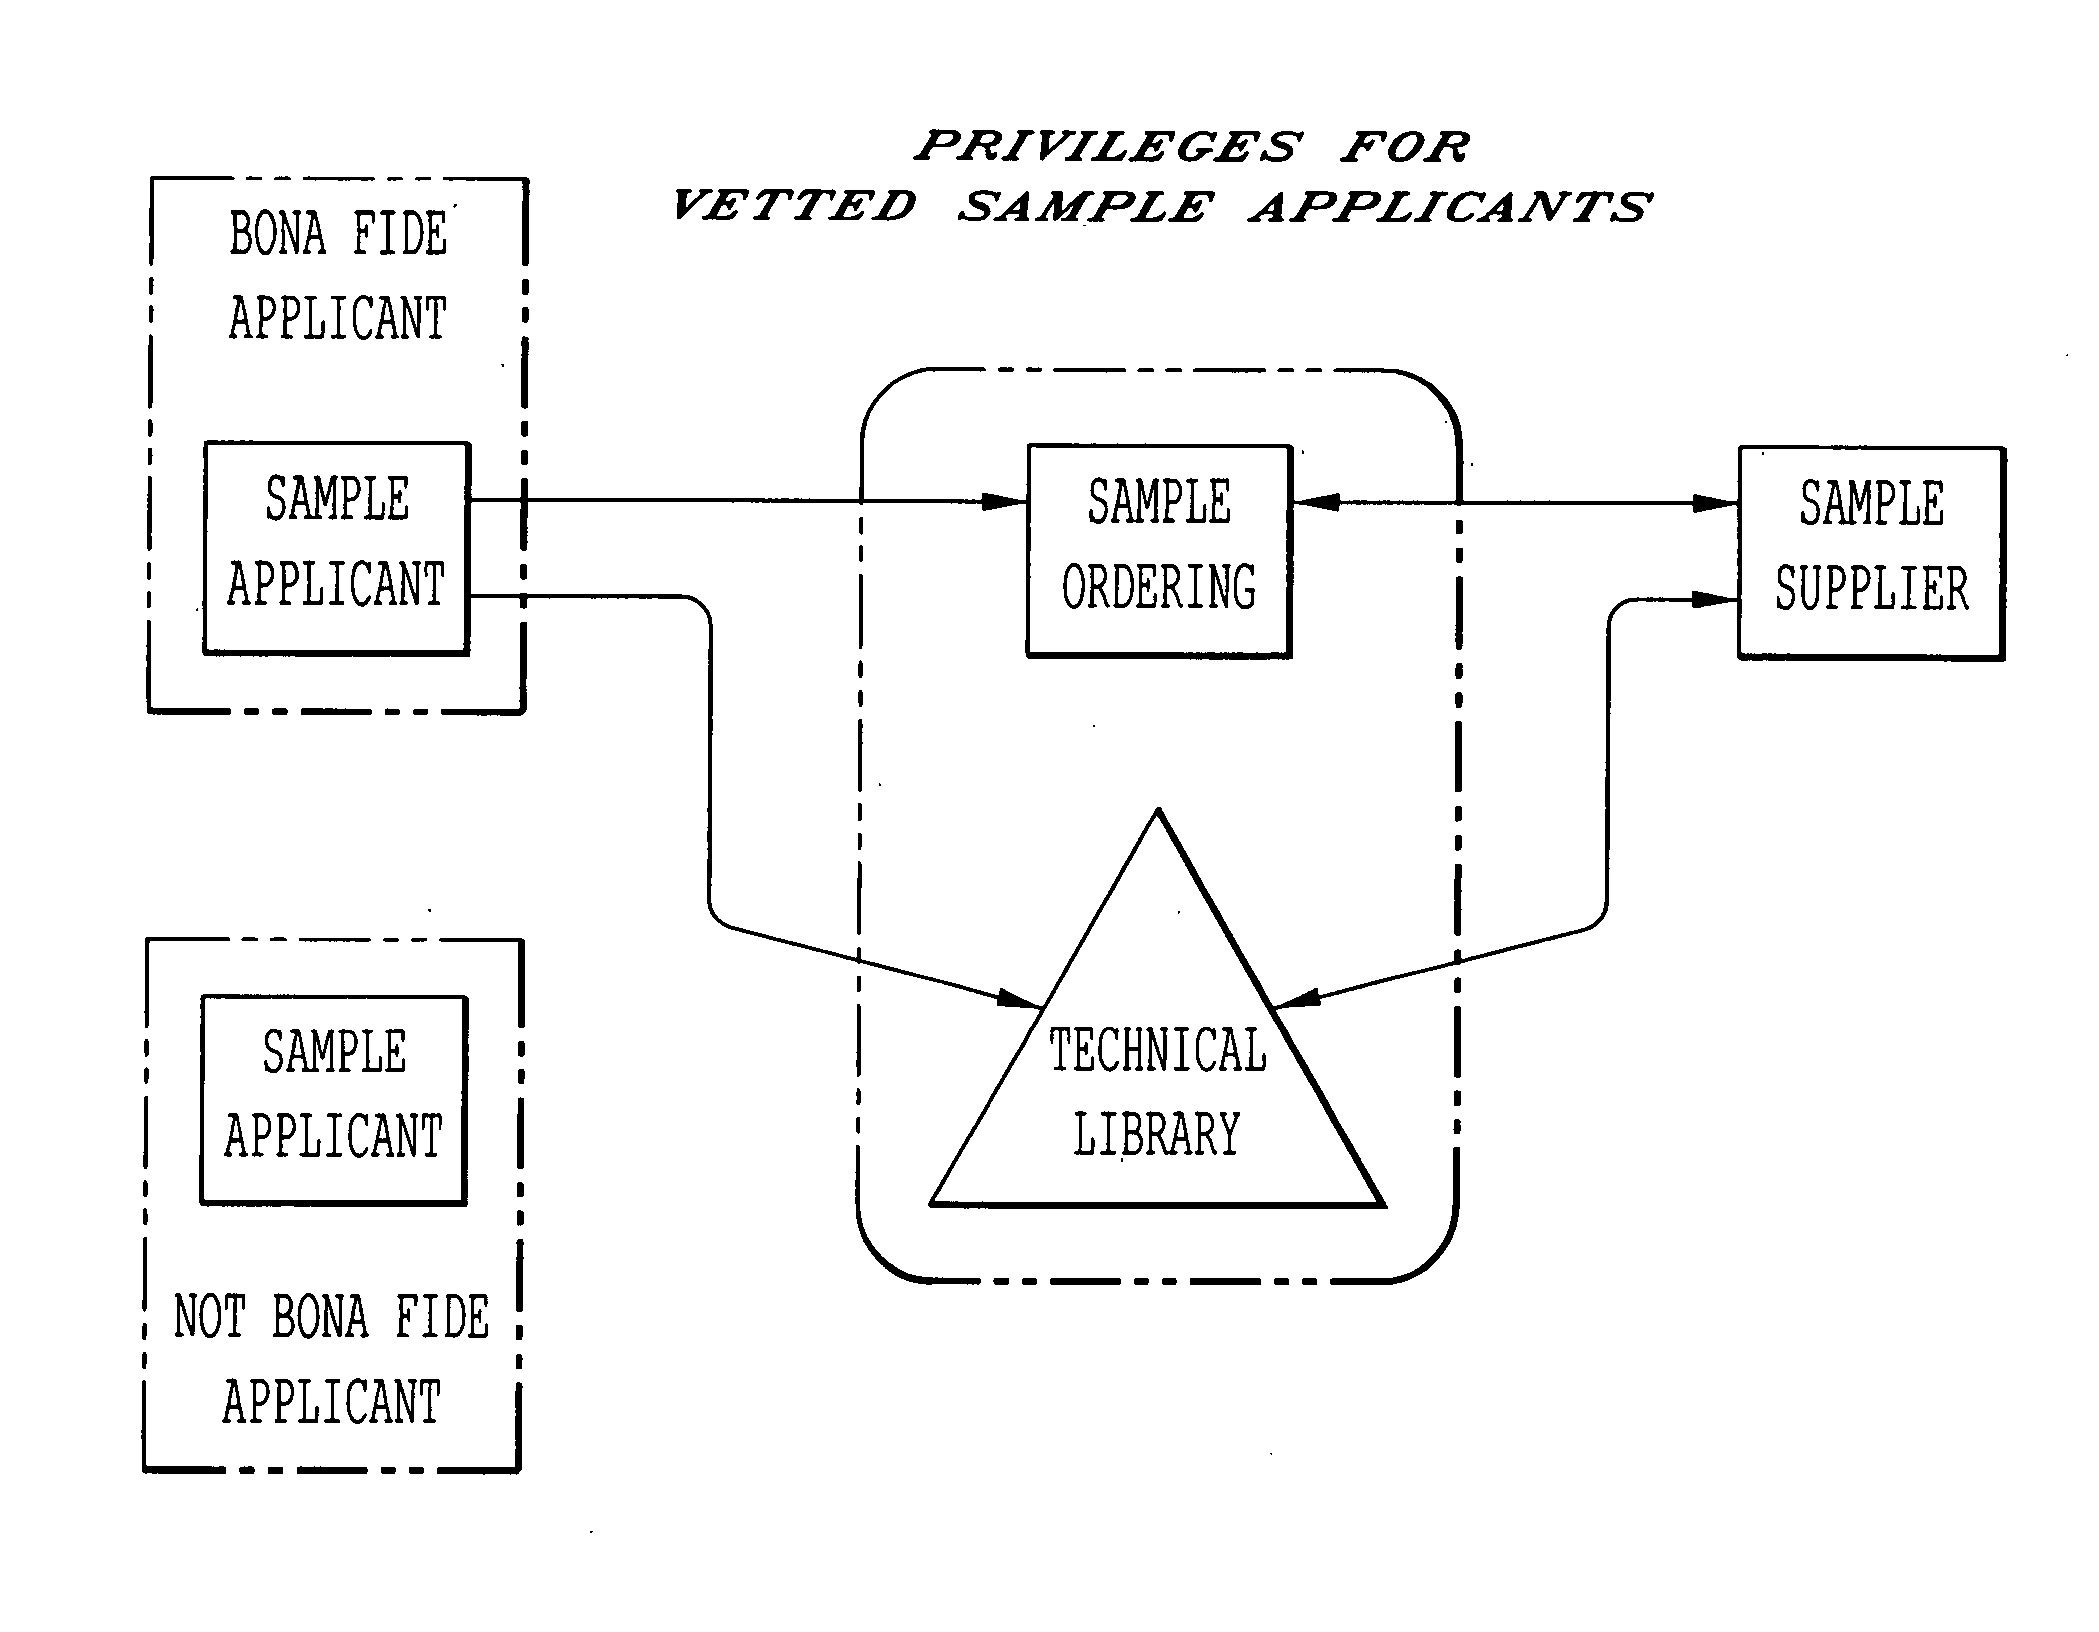 Method of sample distribution, sample tracking and integration with sales follow-up